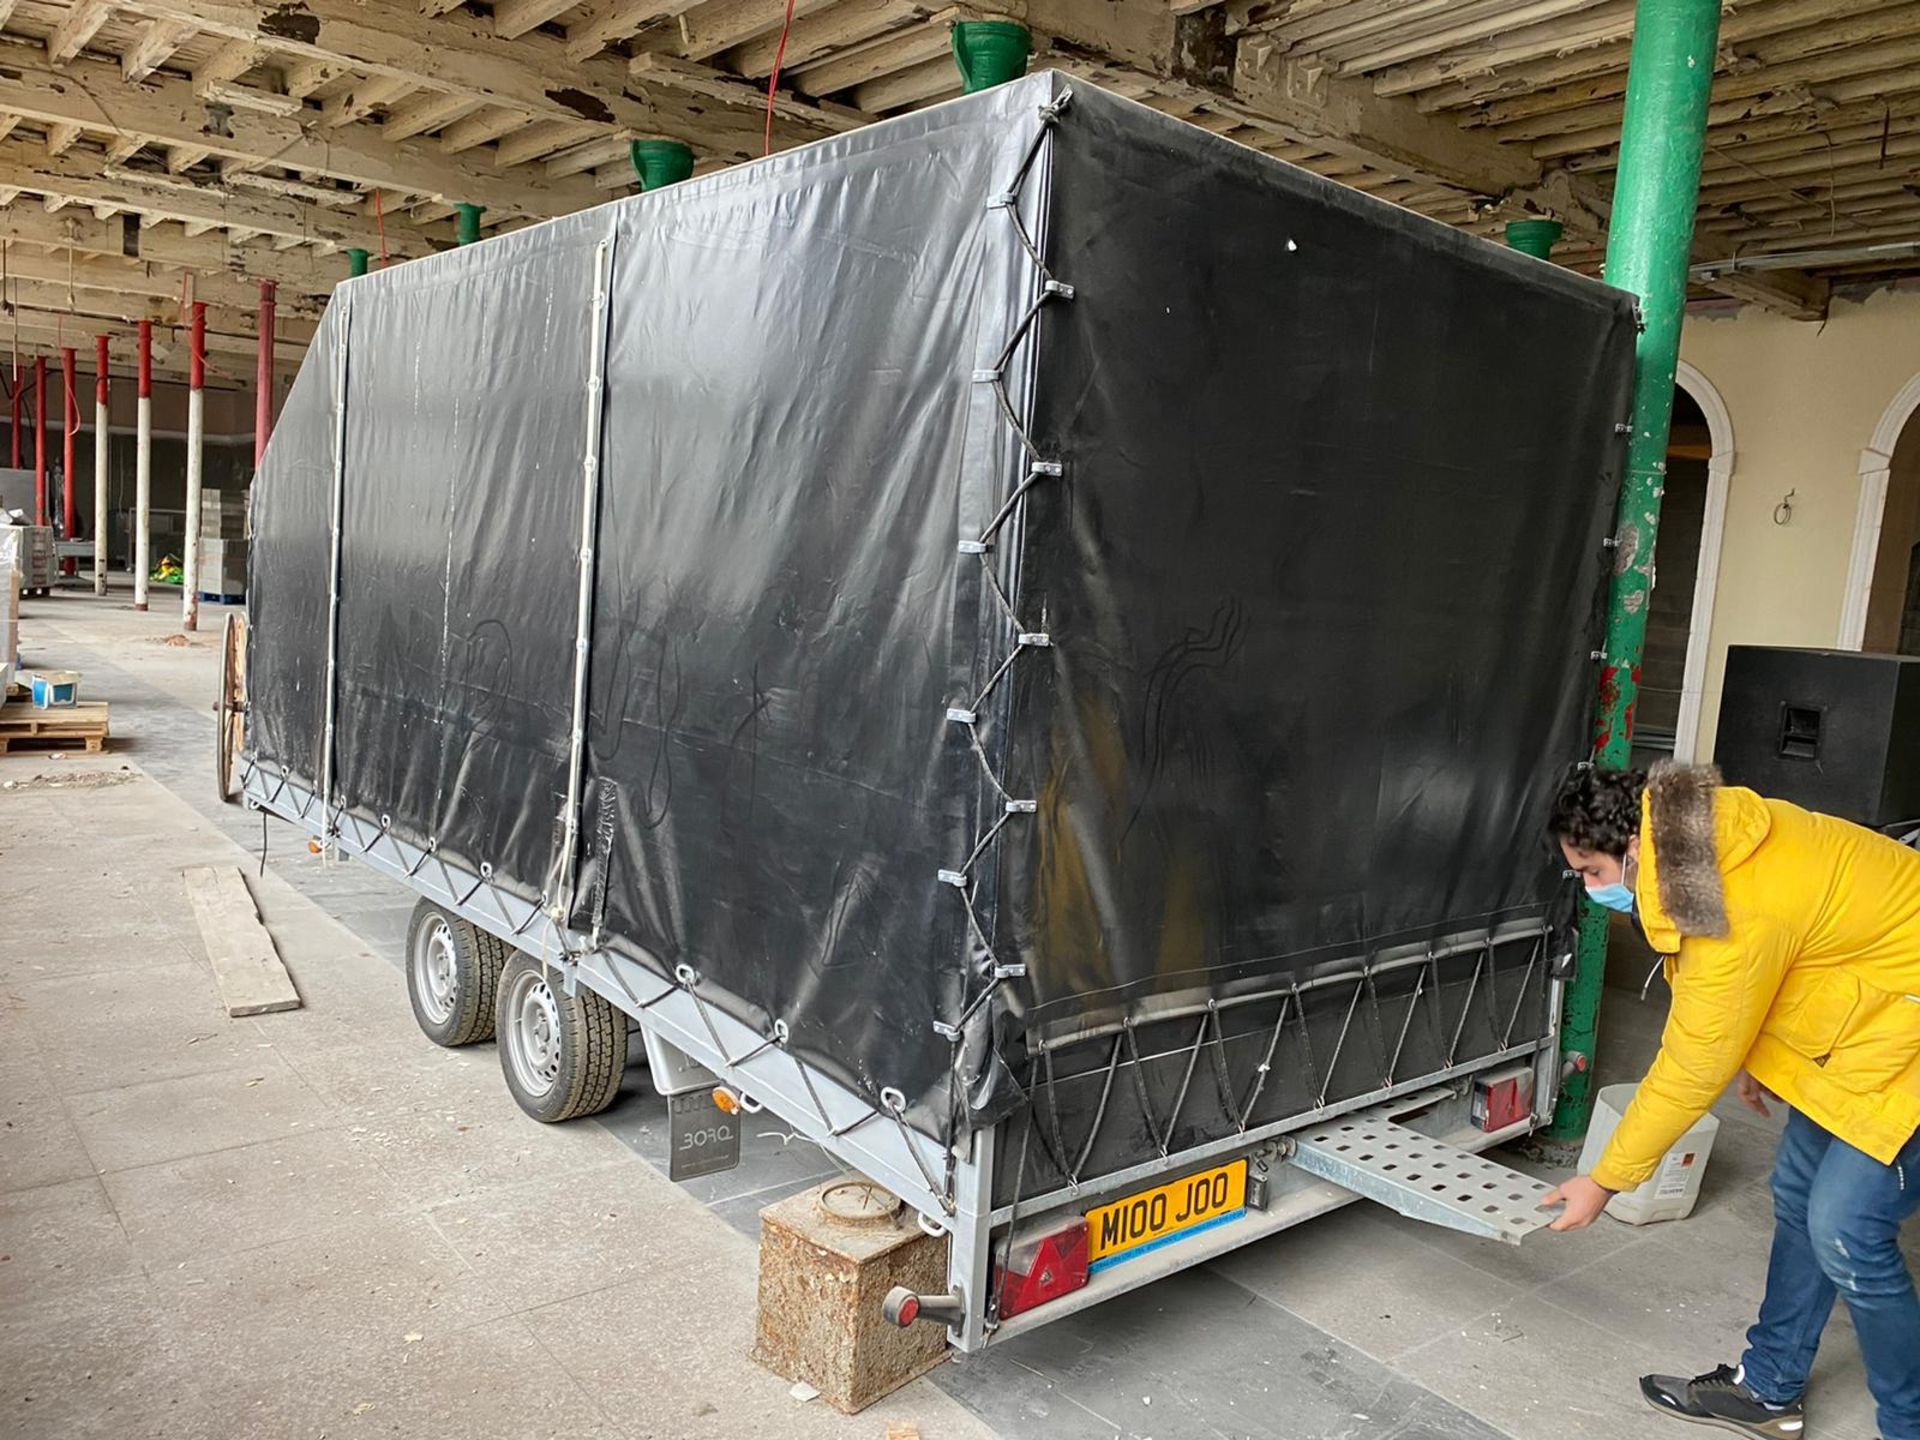 2019 Enclsosed car trailer been used for track day transporting our Lamborghini Gallardo to track - Image 4 of 8